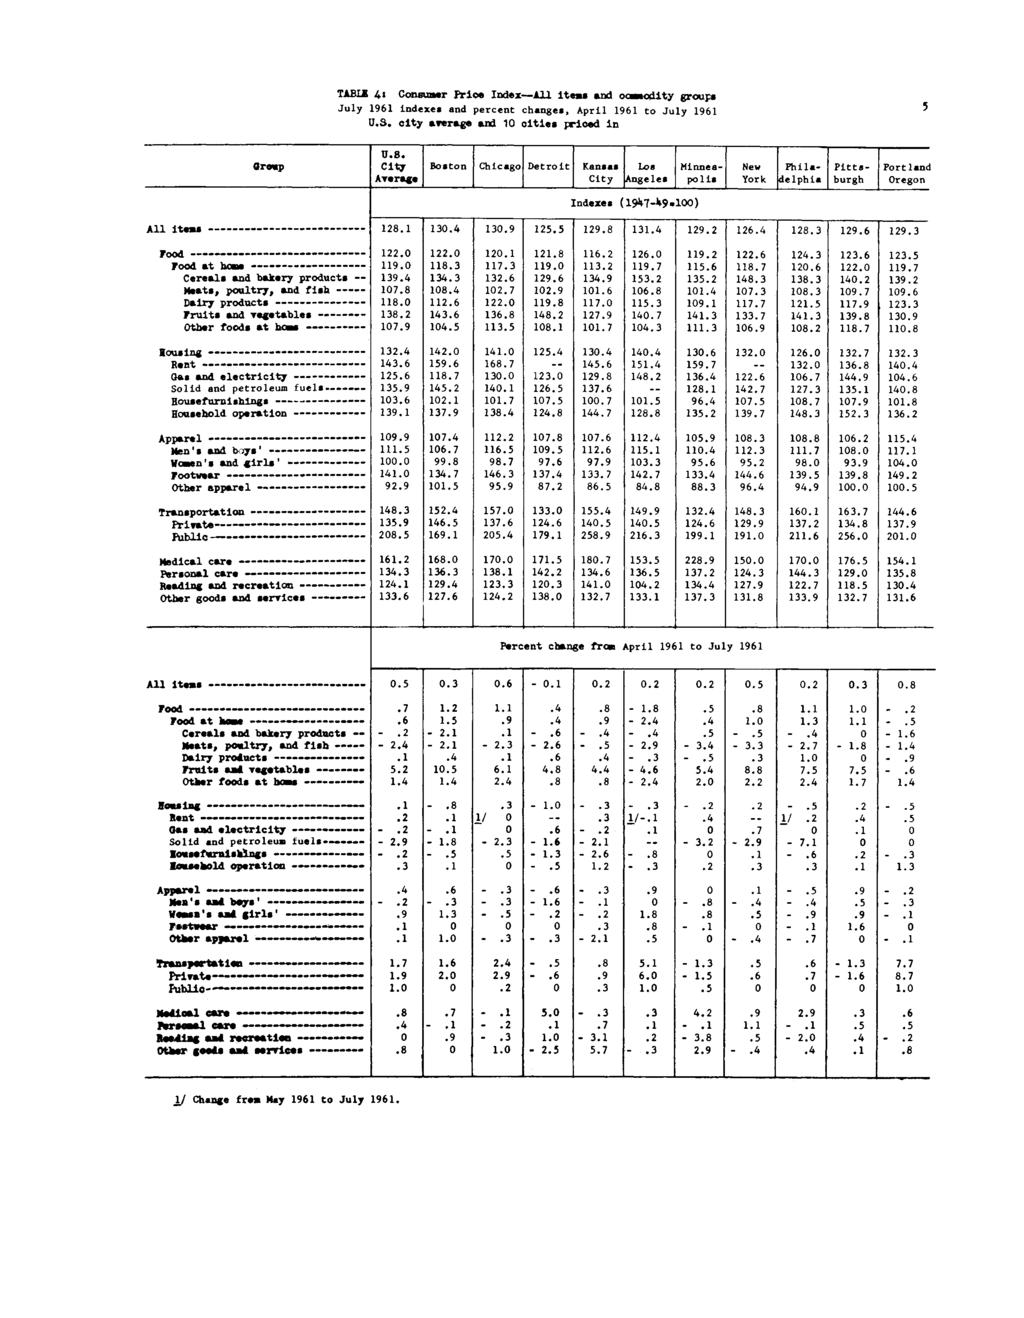 TABLE Ut Consumer Prioe 111 items and ooviodlty groups indexes and percent s, to U.S. city average and 1 cities priced in U.